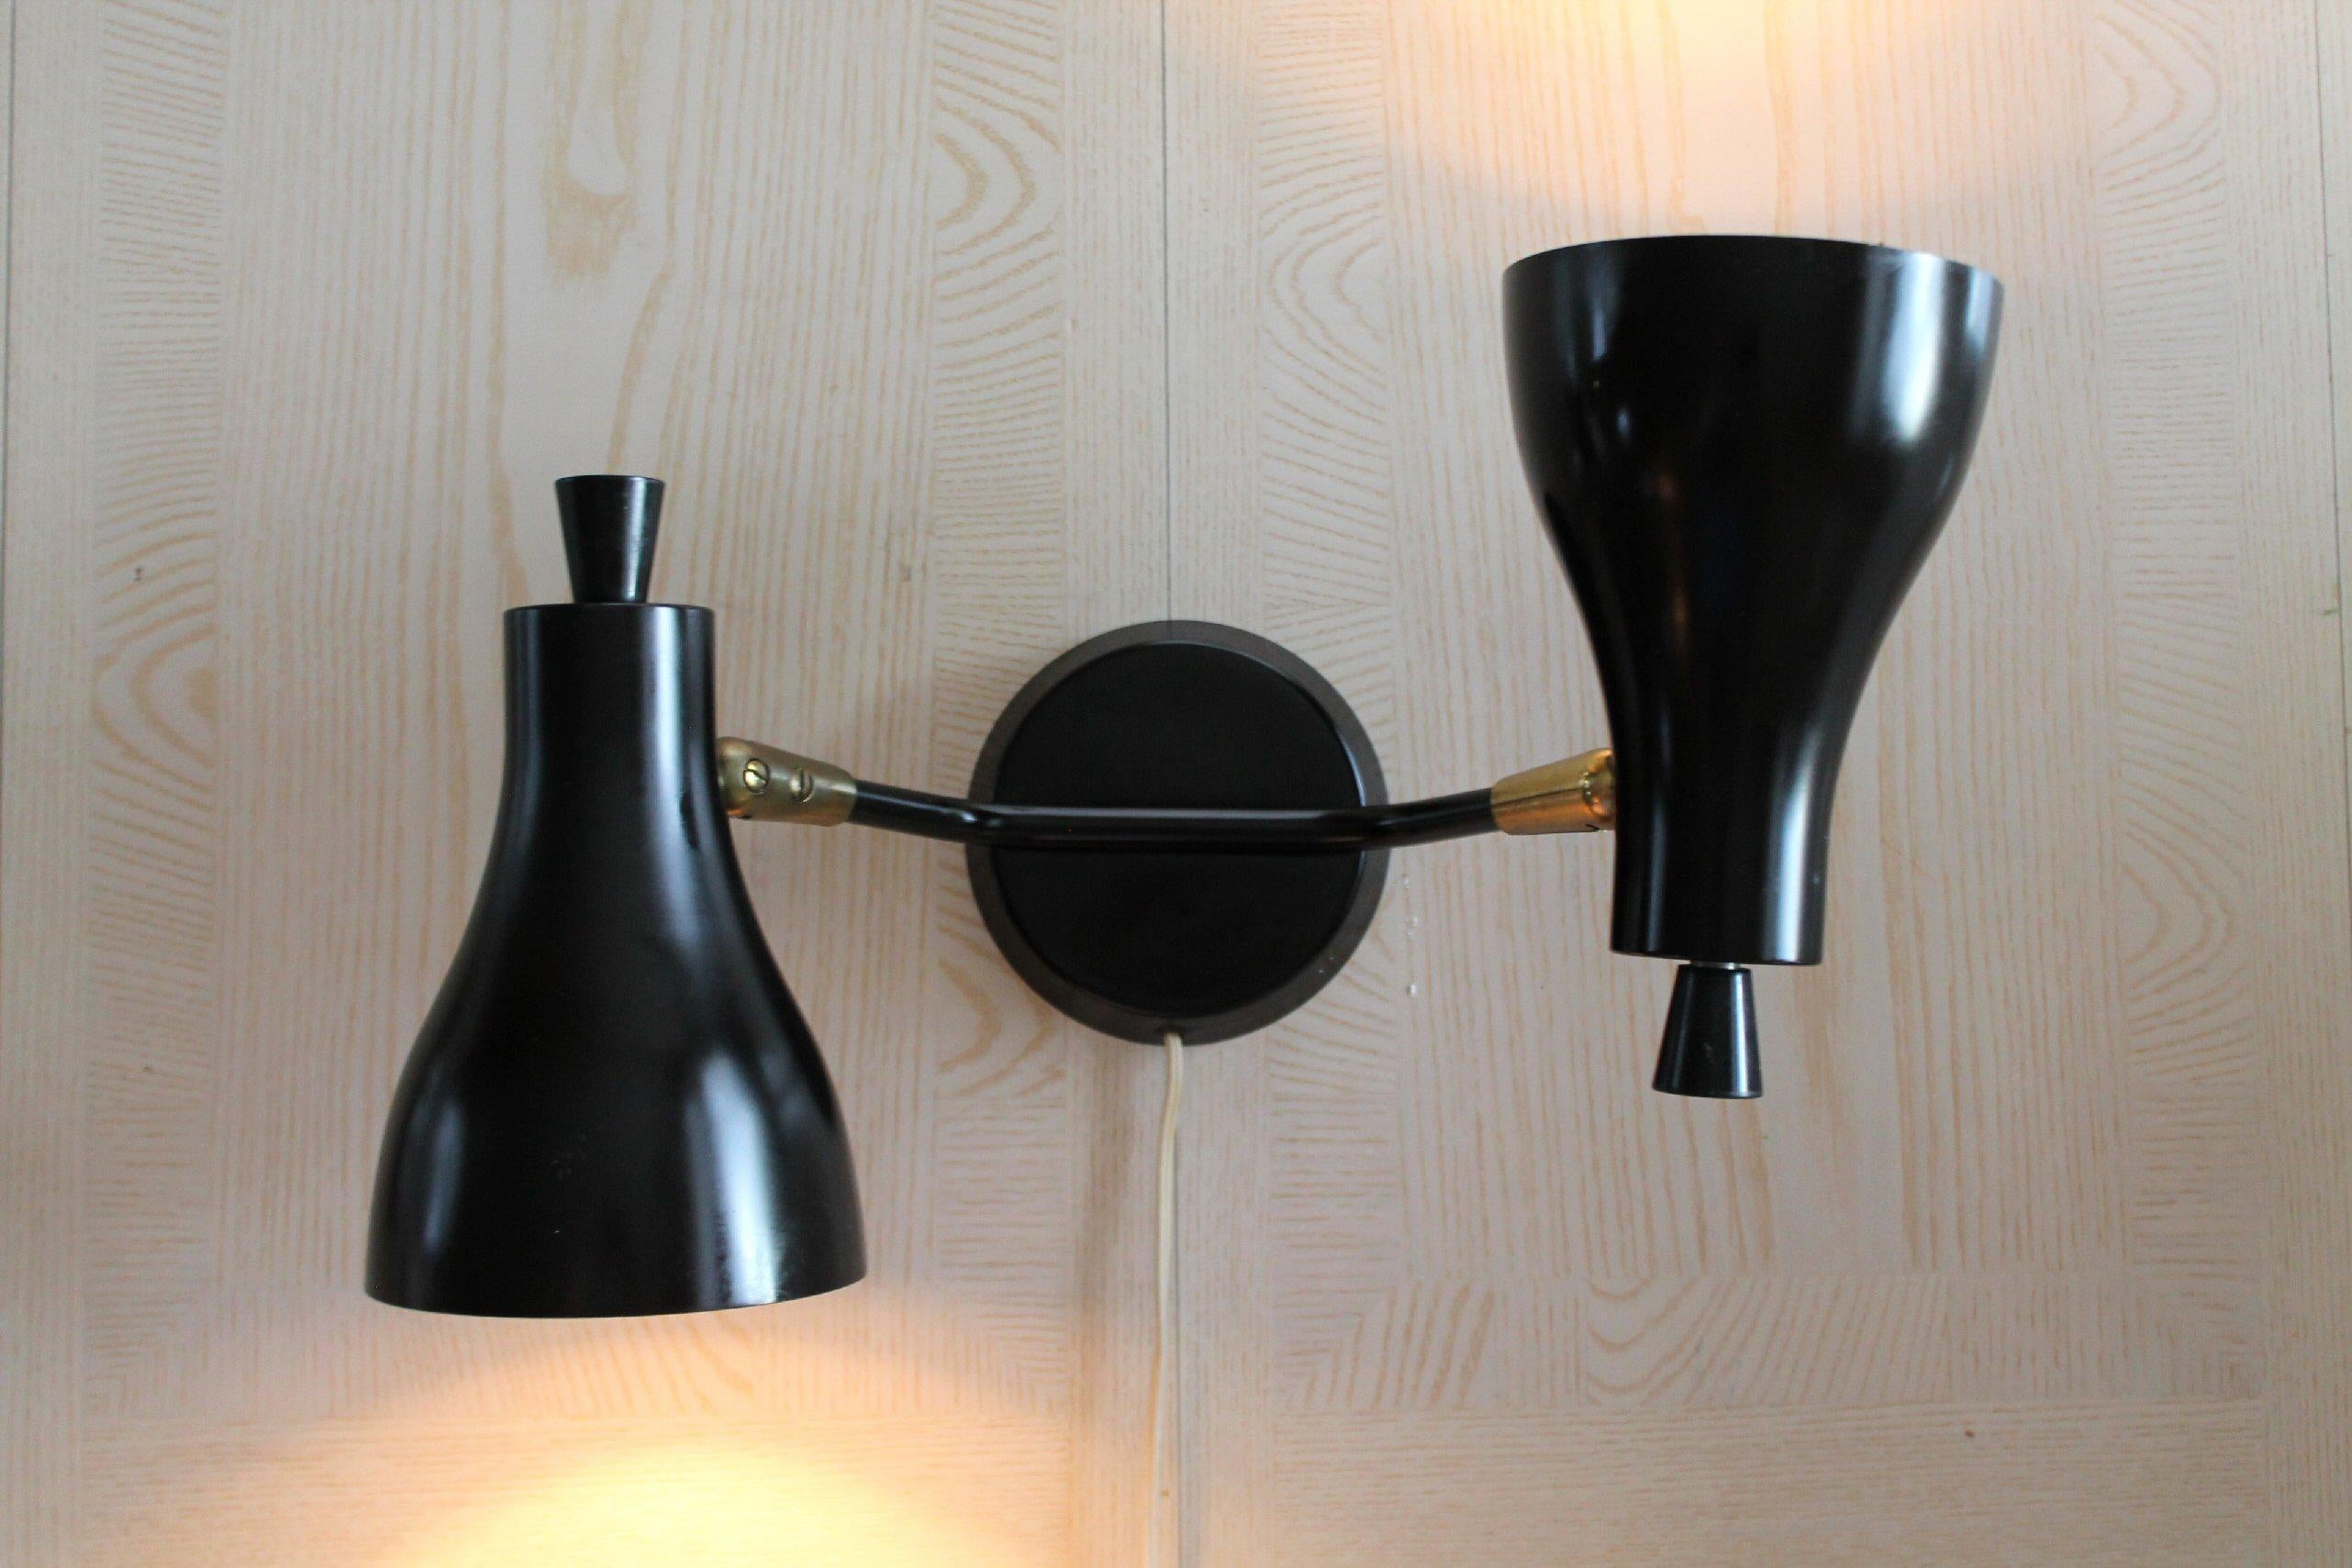 ICONIC!

Simply BEAUTIFUL Black
LIGHTOLIER DUAL SHADE WALL SCONCE
By GERALD THURSTON

Does your Case Study House need new lamps? This marvelous specimen is sure to be a welcome addition!

These lamps, penned by Gerald Thurston the in-house designer